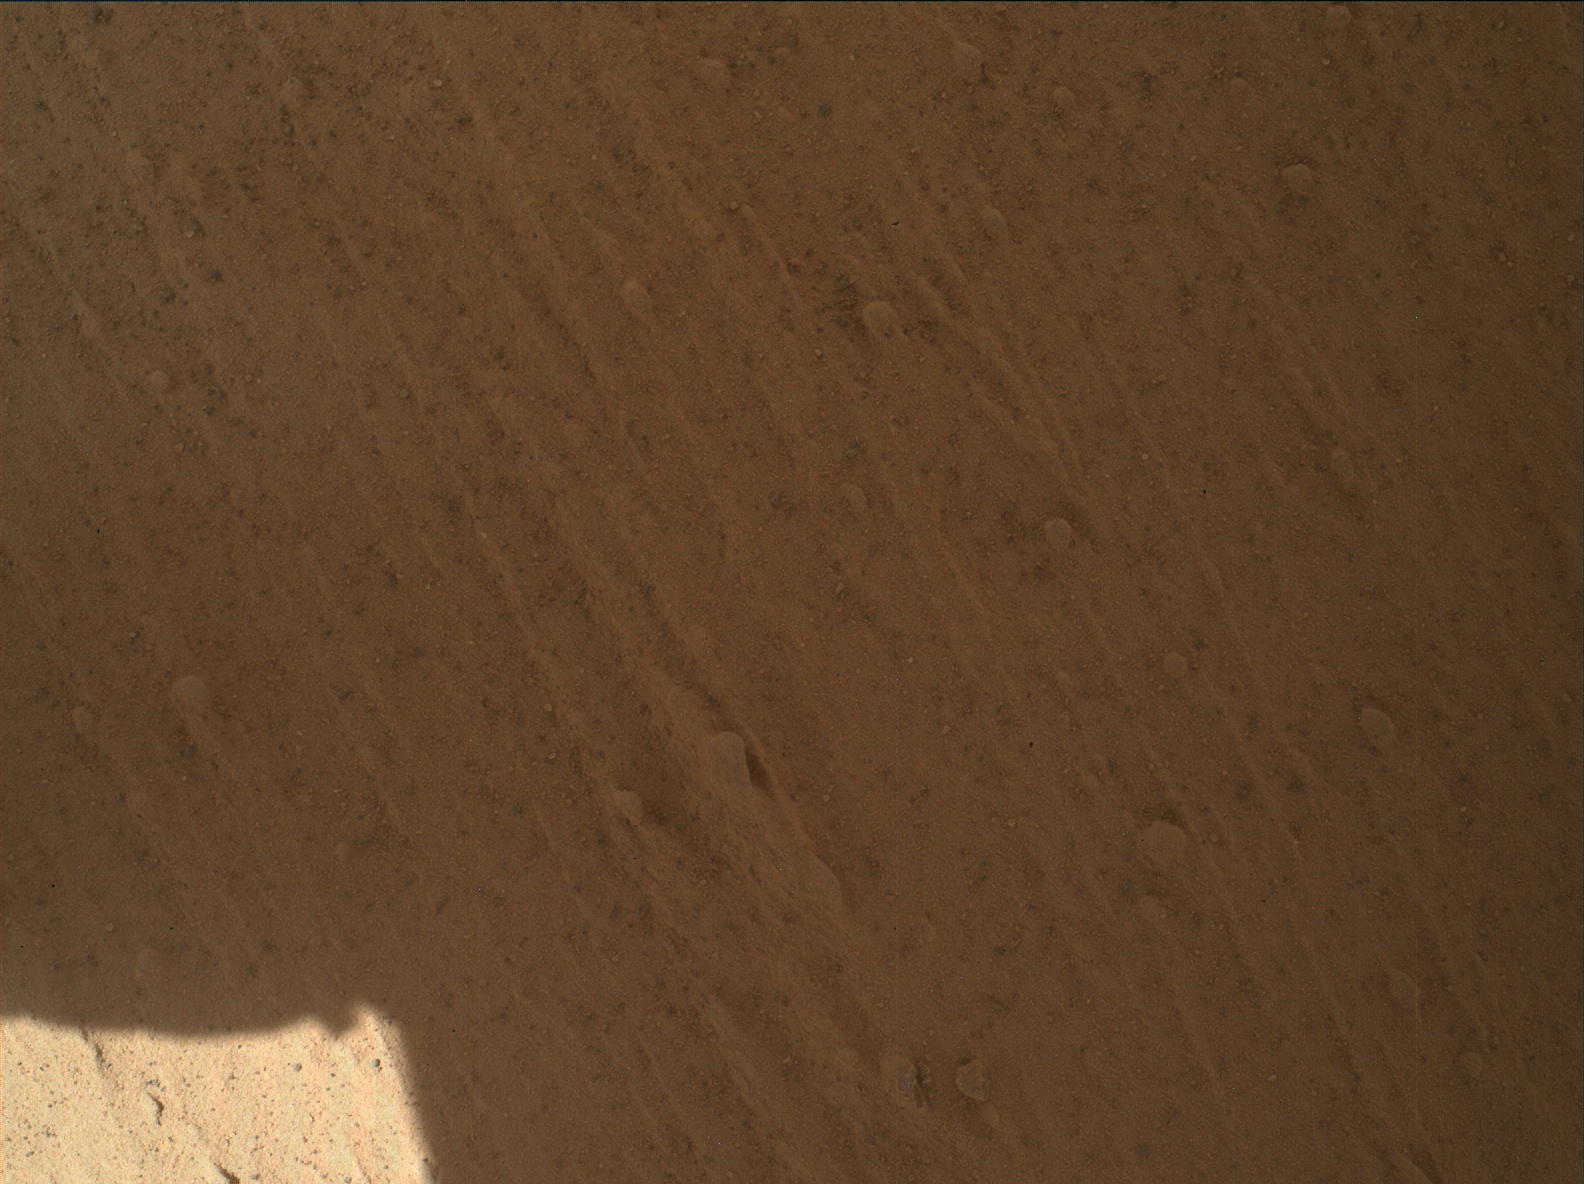 Nasa's Mars rover Curiosity acquired this image using its Mars Hand Lens Imager (MAHLI) on Sol 3960